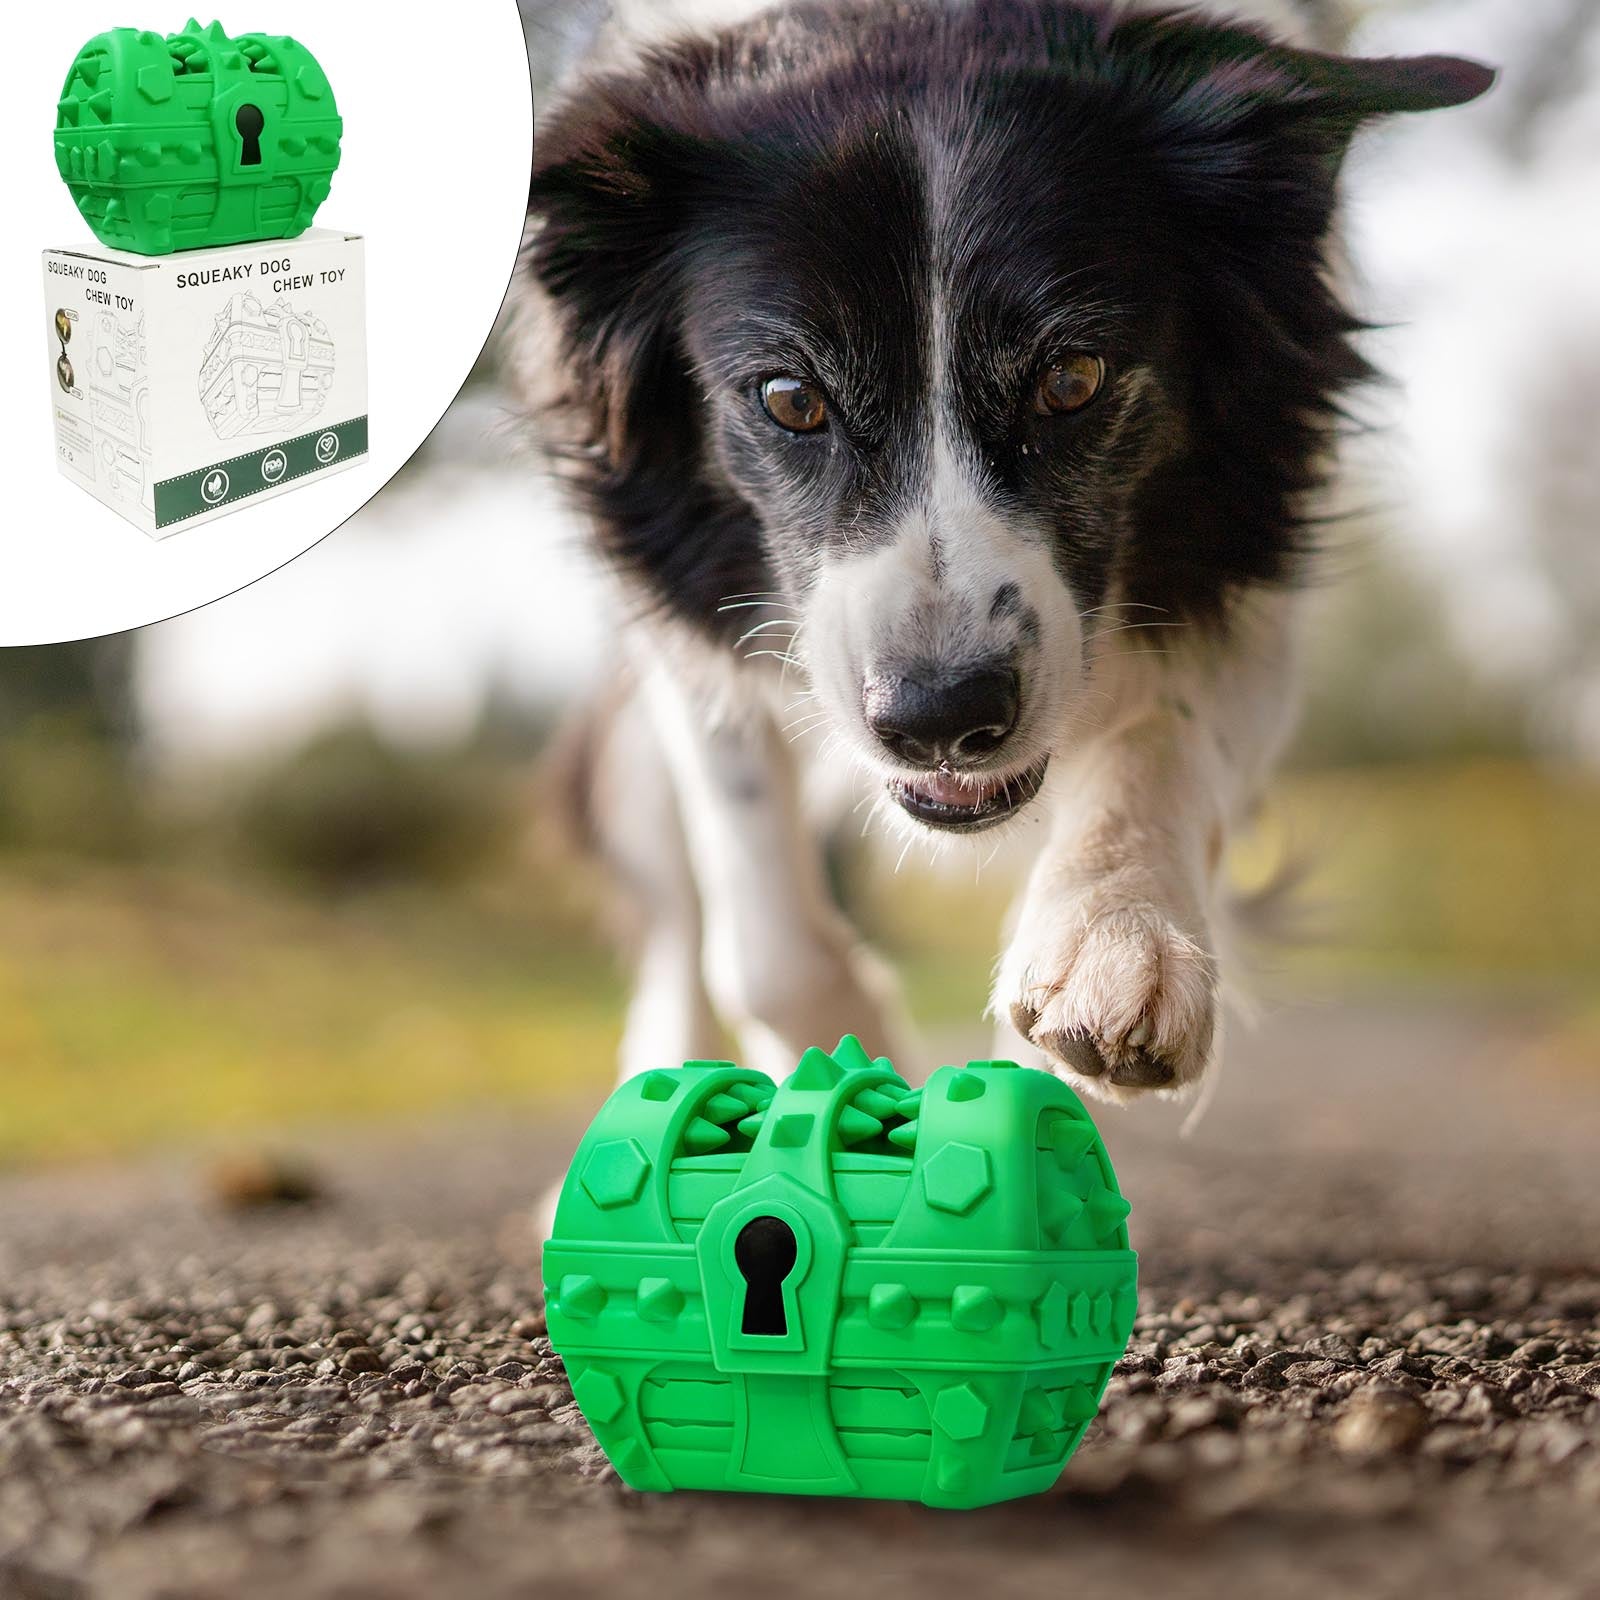 Pet Dog Toothbrush Chew Toys, Upgraded Treasure Chest Sounding Toy